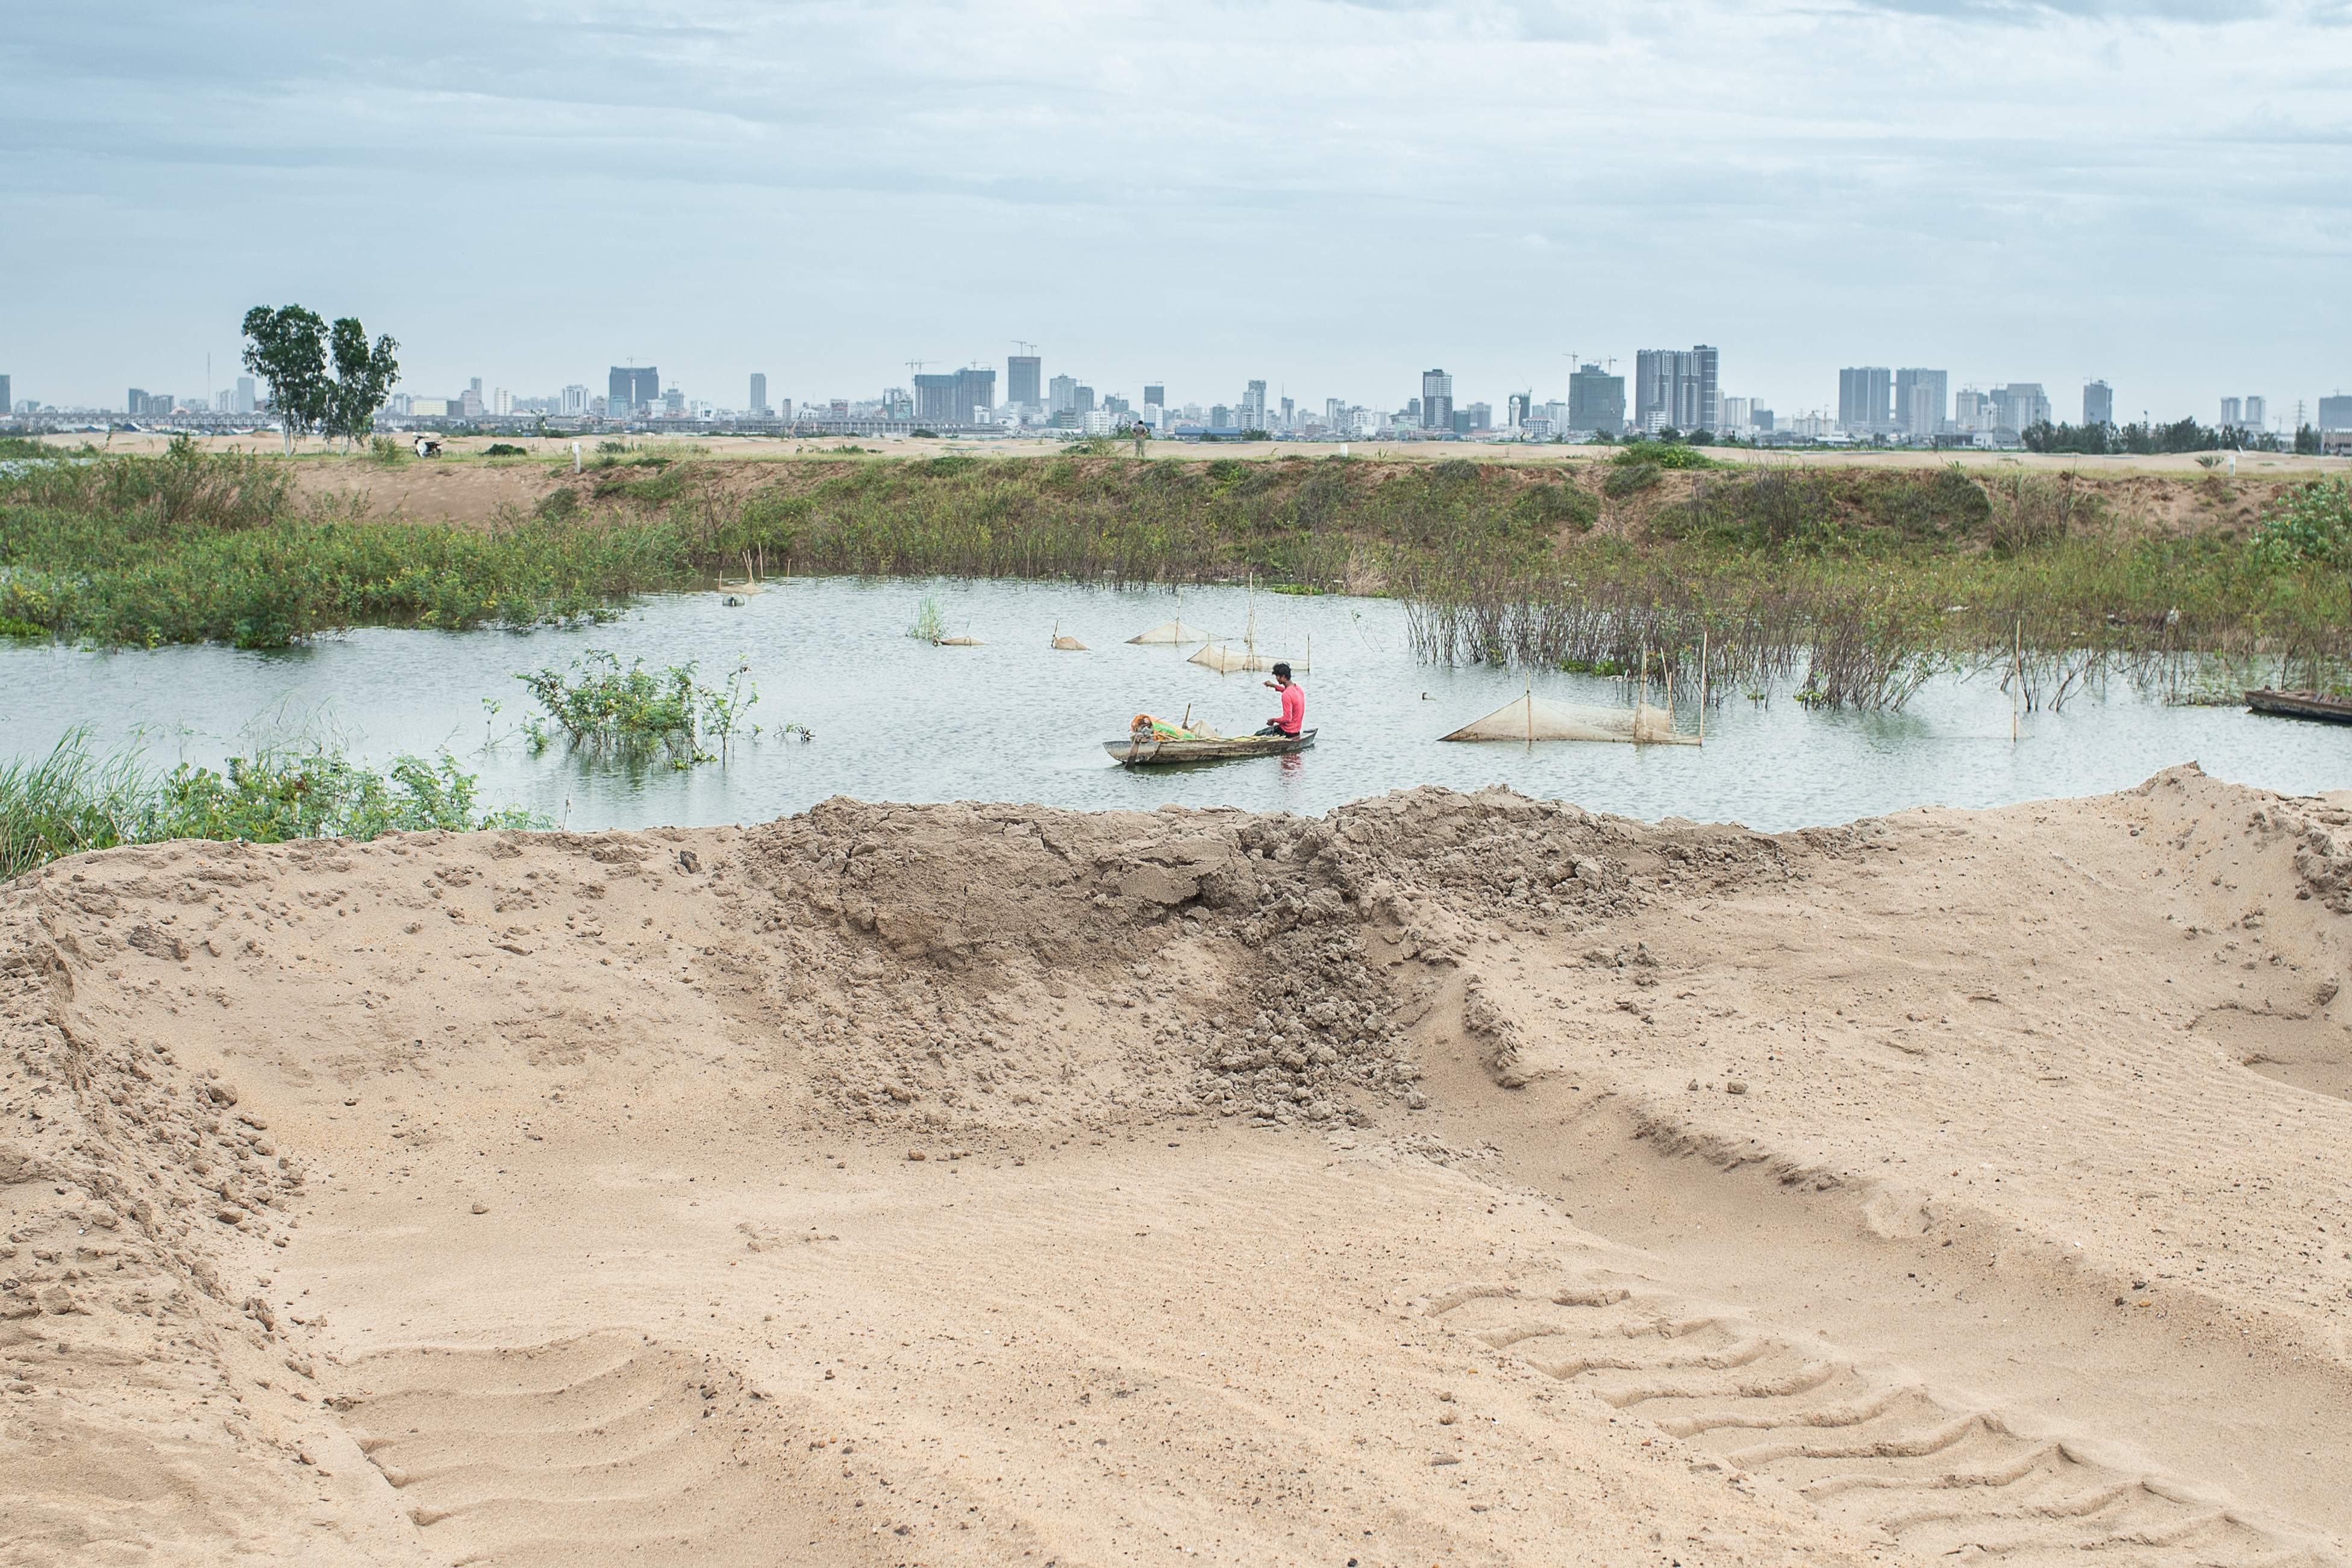 A young man trying to fish in Boeung Tompun next to a recent sand filled site in Phnom Penh. Photo: Enric Catala